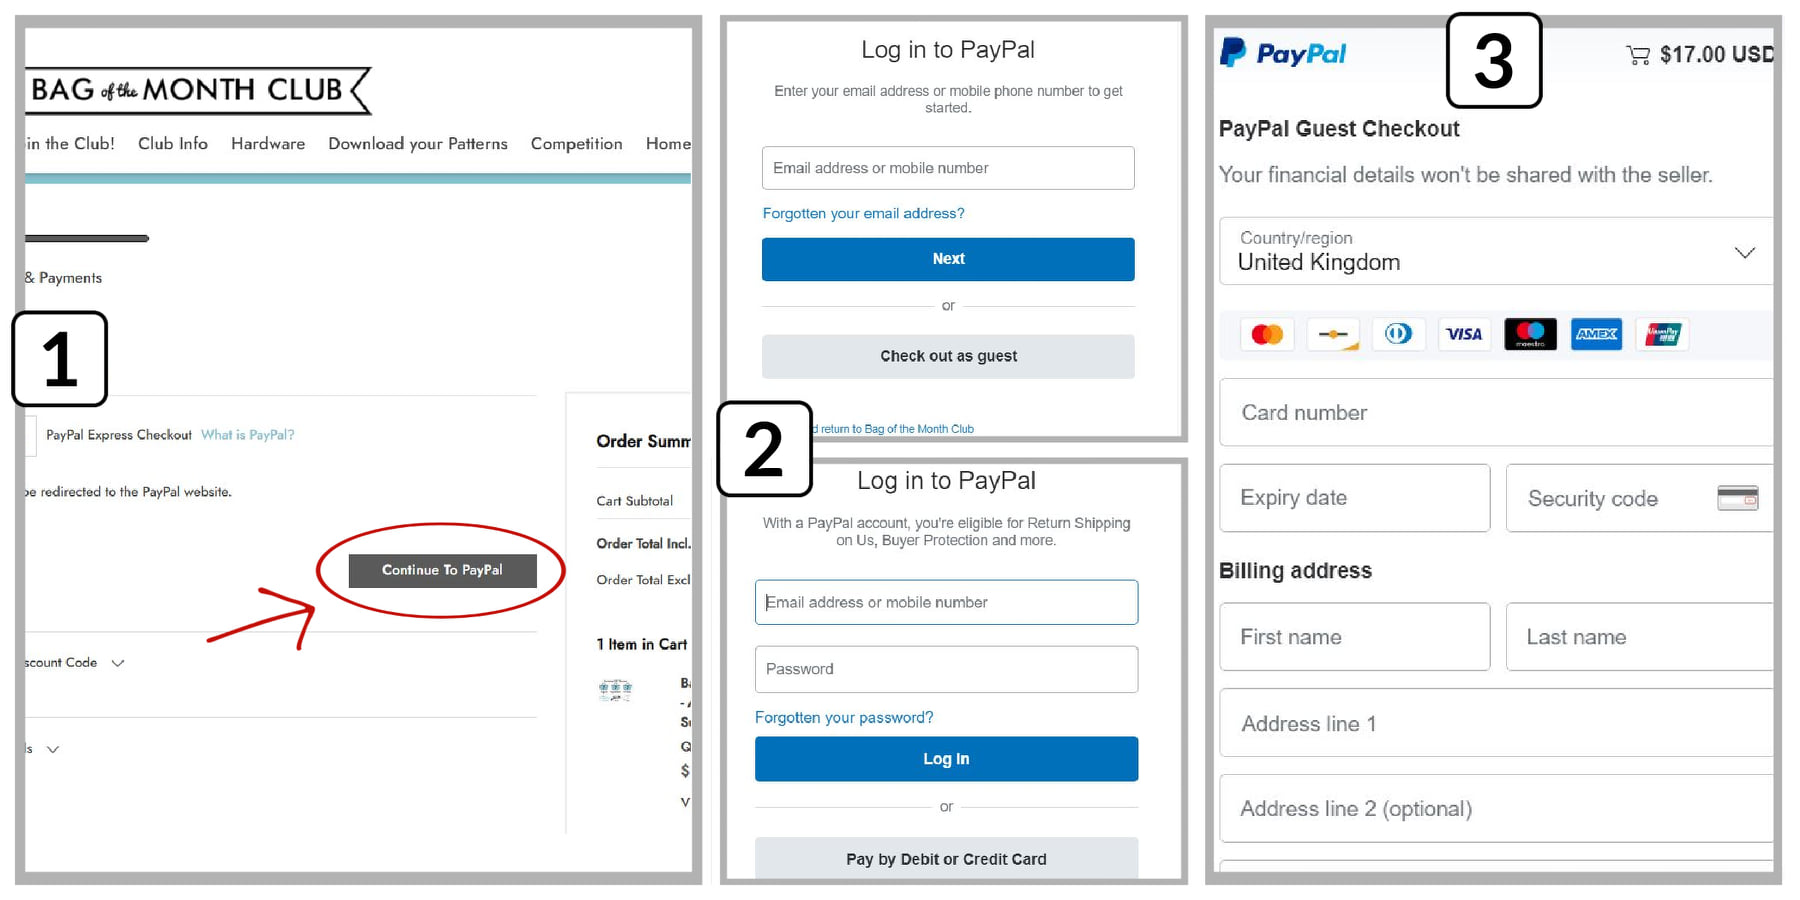 How to check out without PayPal at bagomc.com